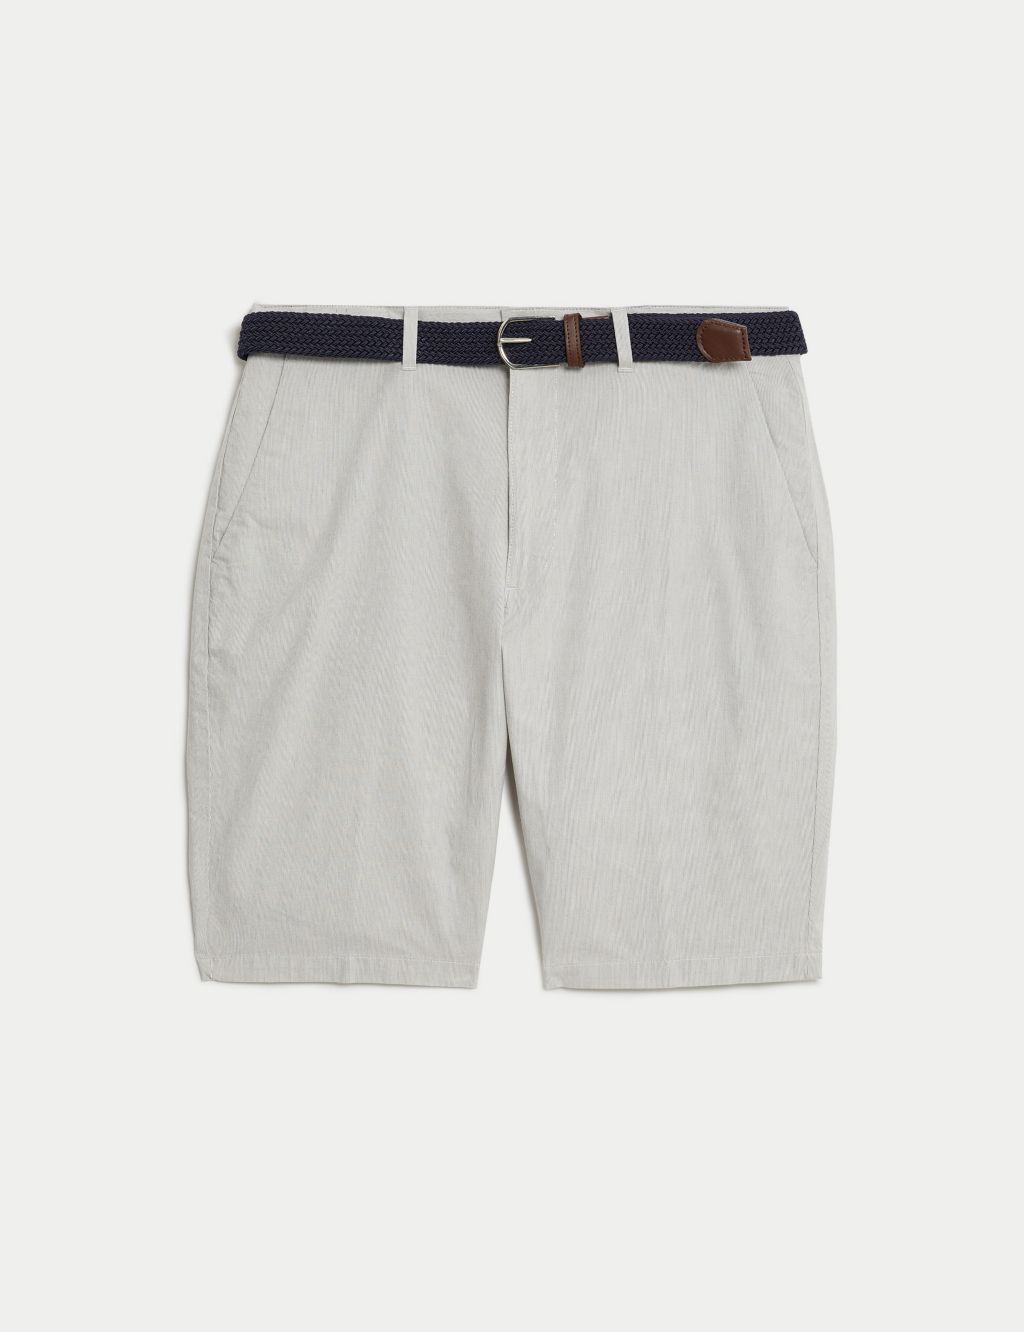 Striped Belted Stretch Chino Shorts image 1